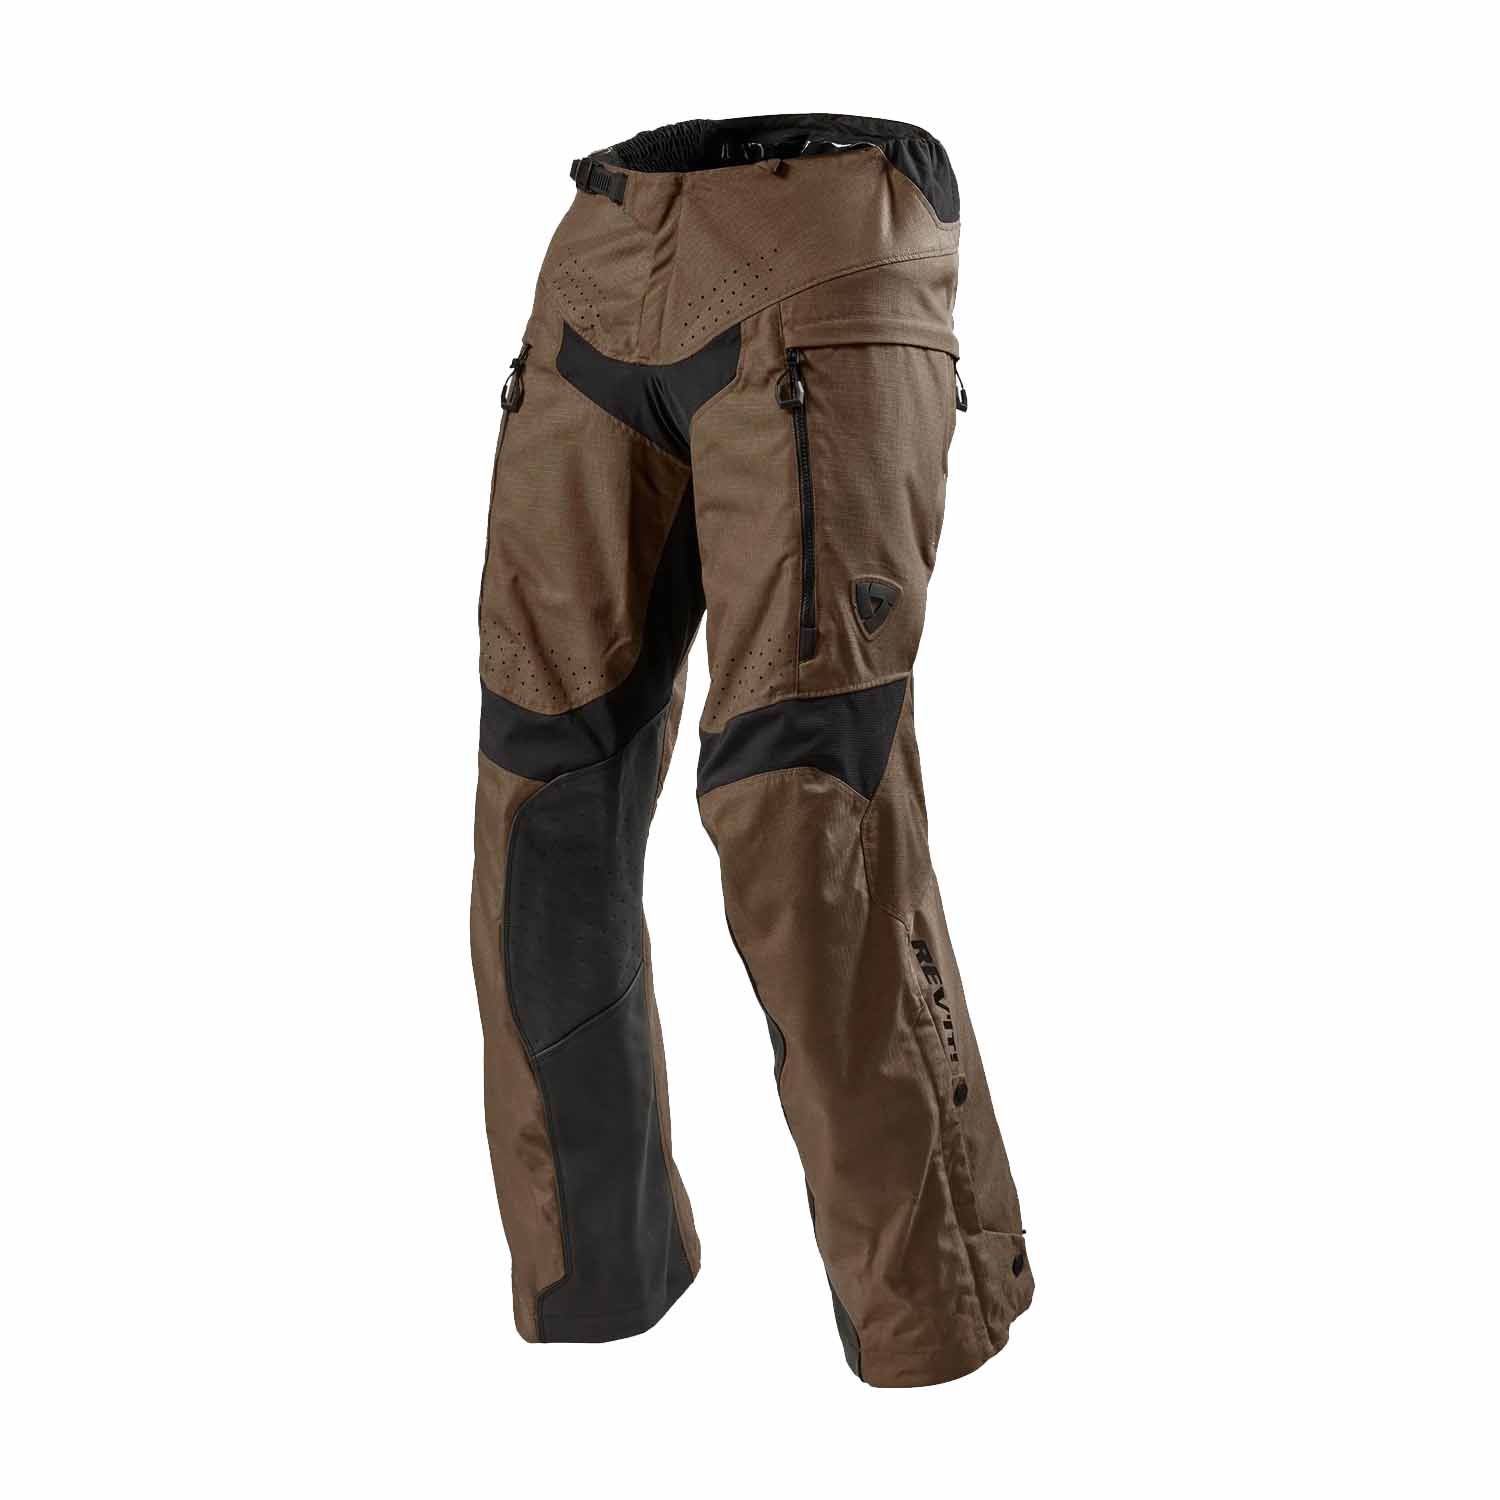 Image of REV'IT! Continent Pants Brown Standard Motorcycle Pants Size XL ID 8700001369299